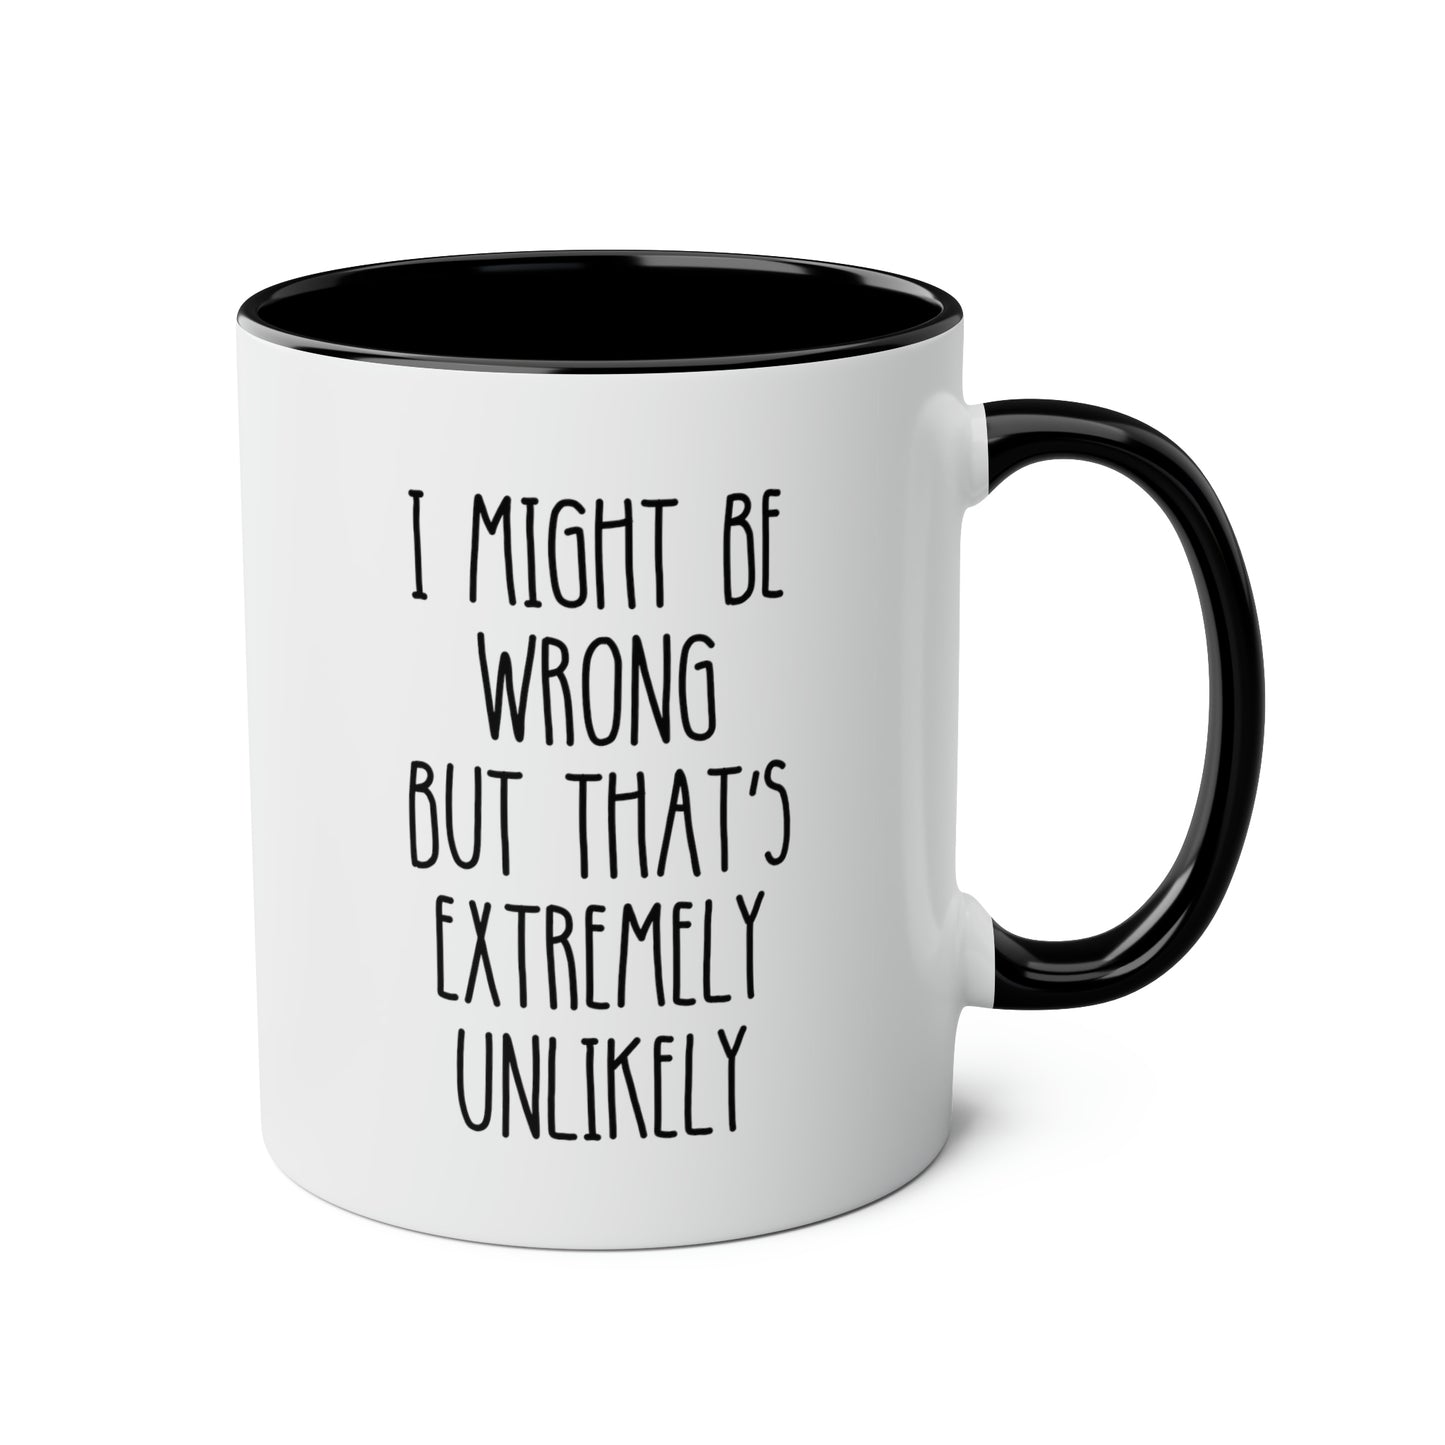 I Might Be Wrong But That's Extremely Unlikely 11oz white with black accent funny large coffee mug gift for­ coworker work saying sarcastic waveywares wavey wares wavywares wavy wares